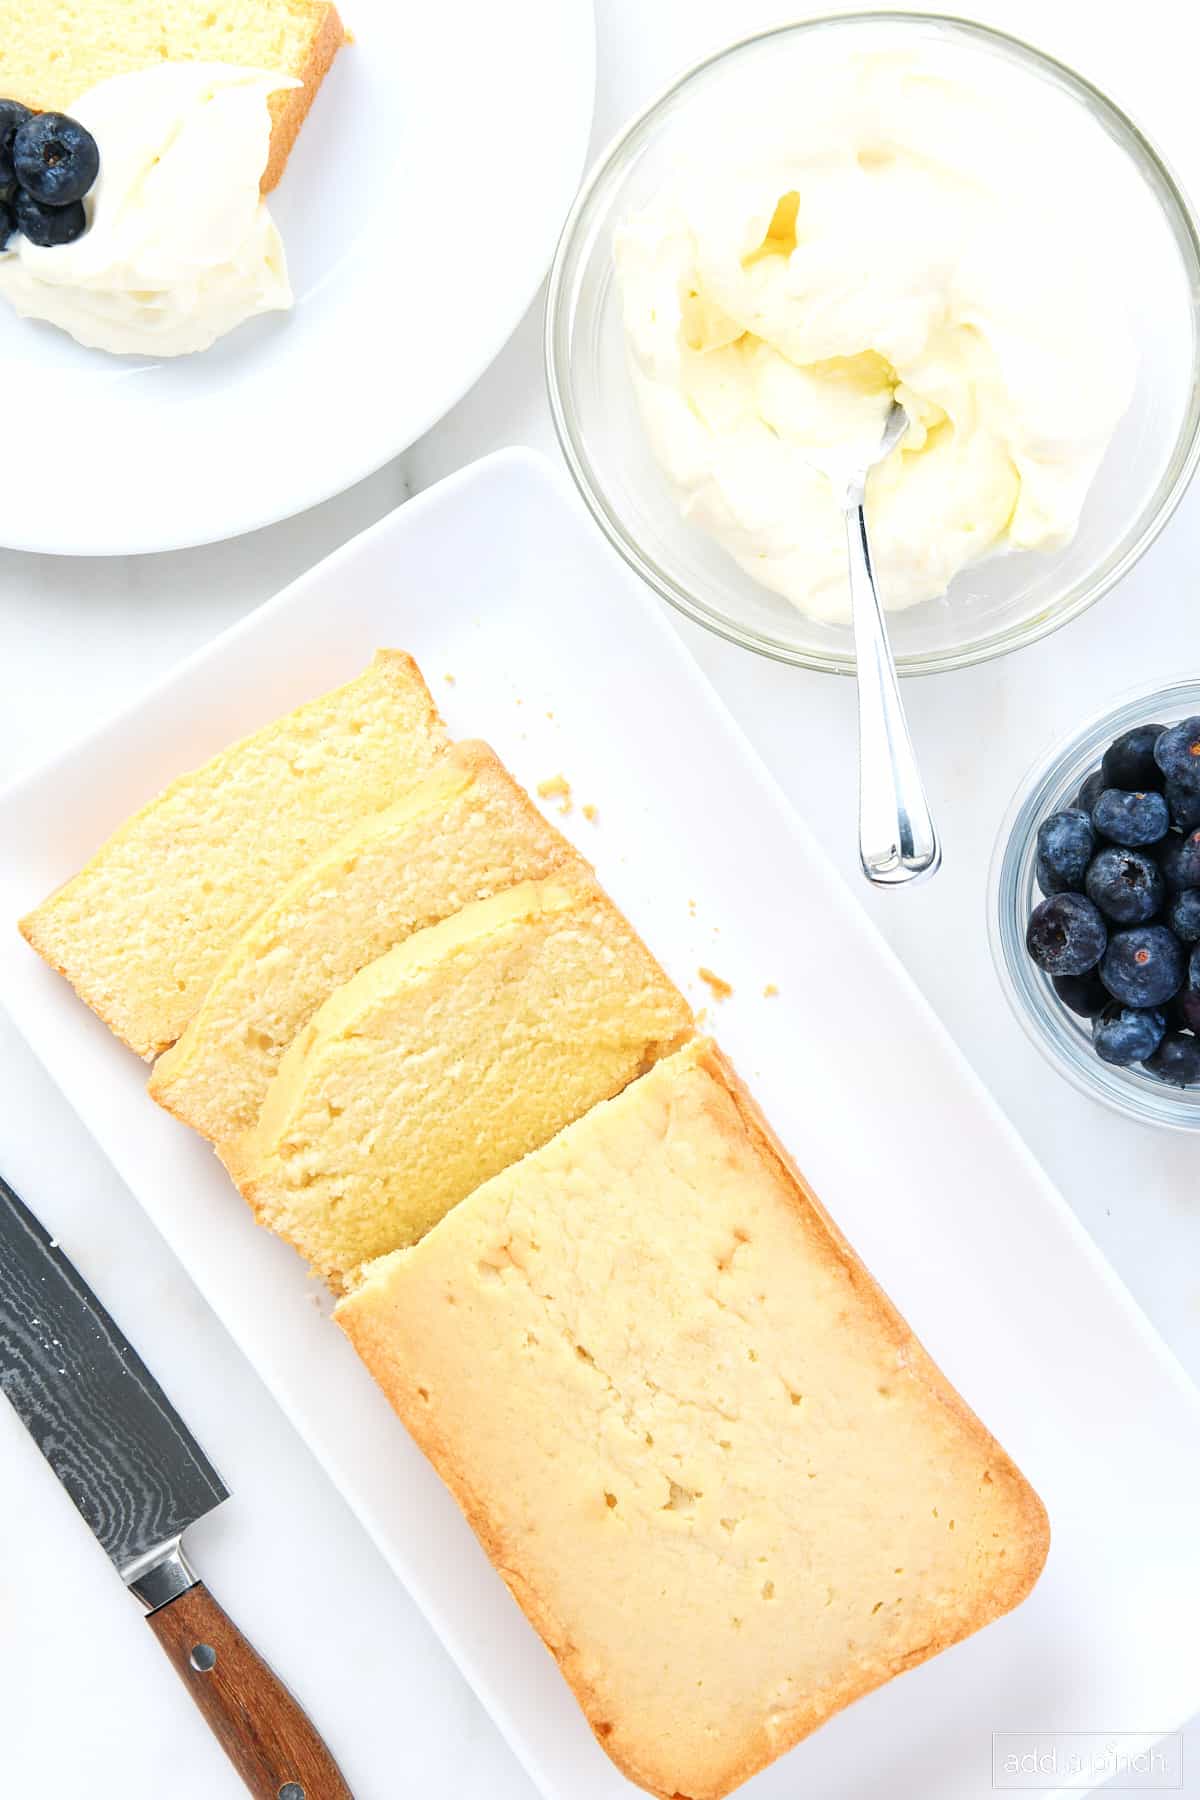 Overhead shot of loaf size pound cake that has been sliced, along with bowl of homemade whipped cream and fresh blueberries. A slice is served on a white plate and a knife is nearby.